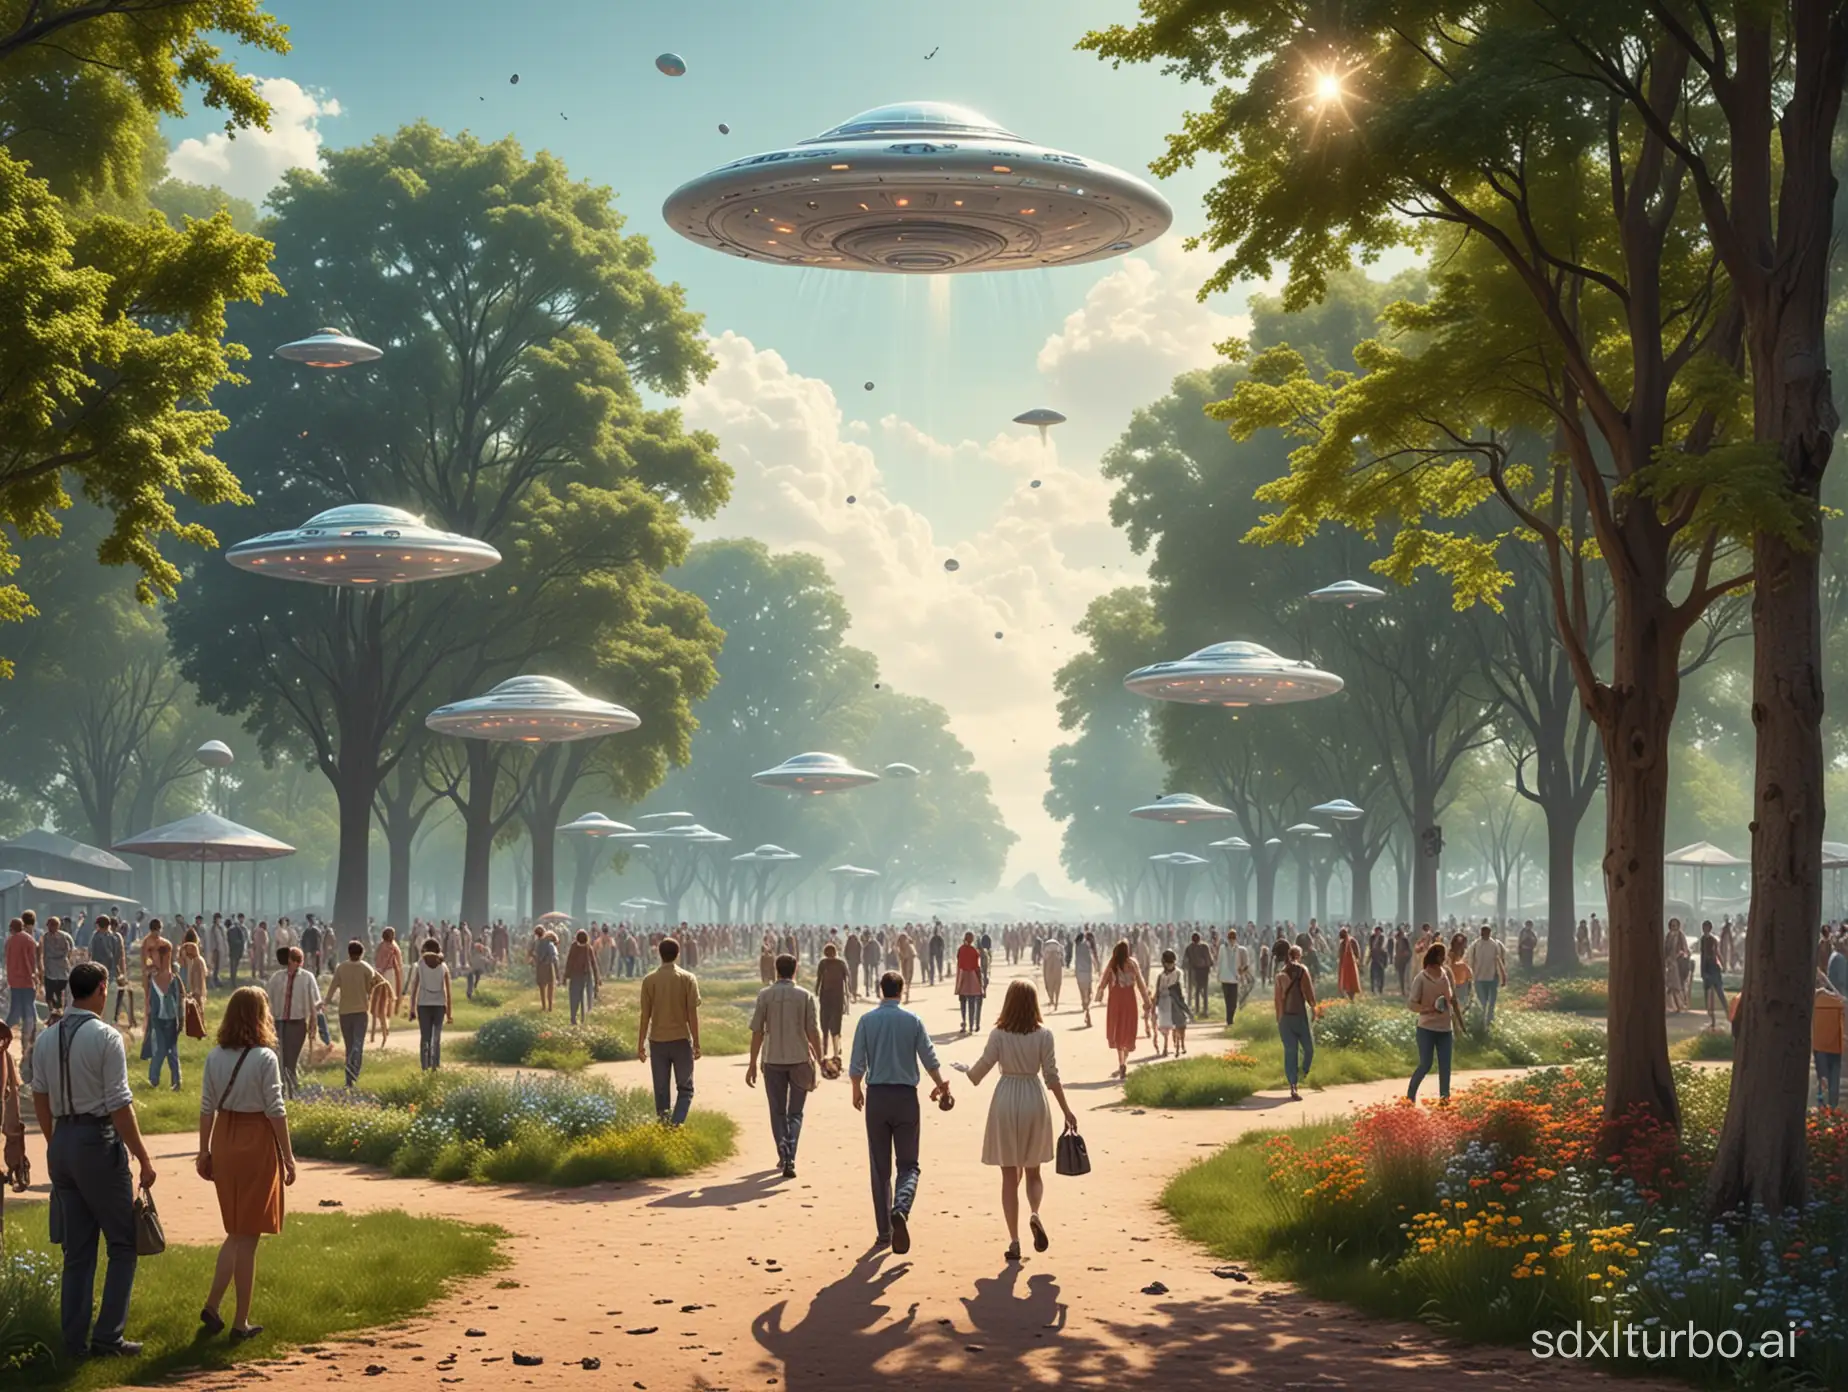 Futuristic-Park-Scene-with-Flying-Saucers-and-Strolling-People